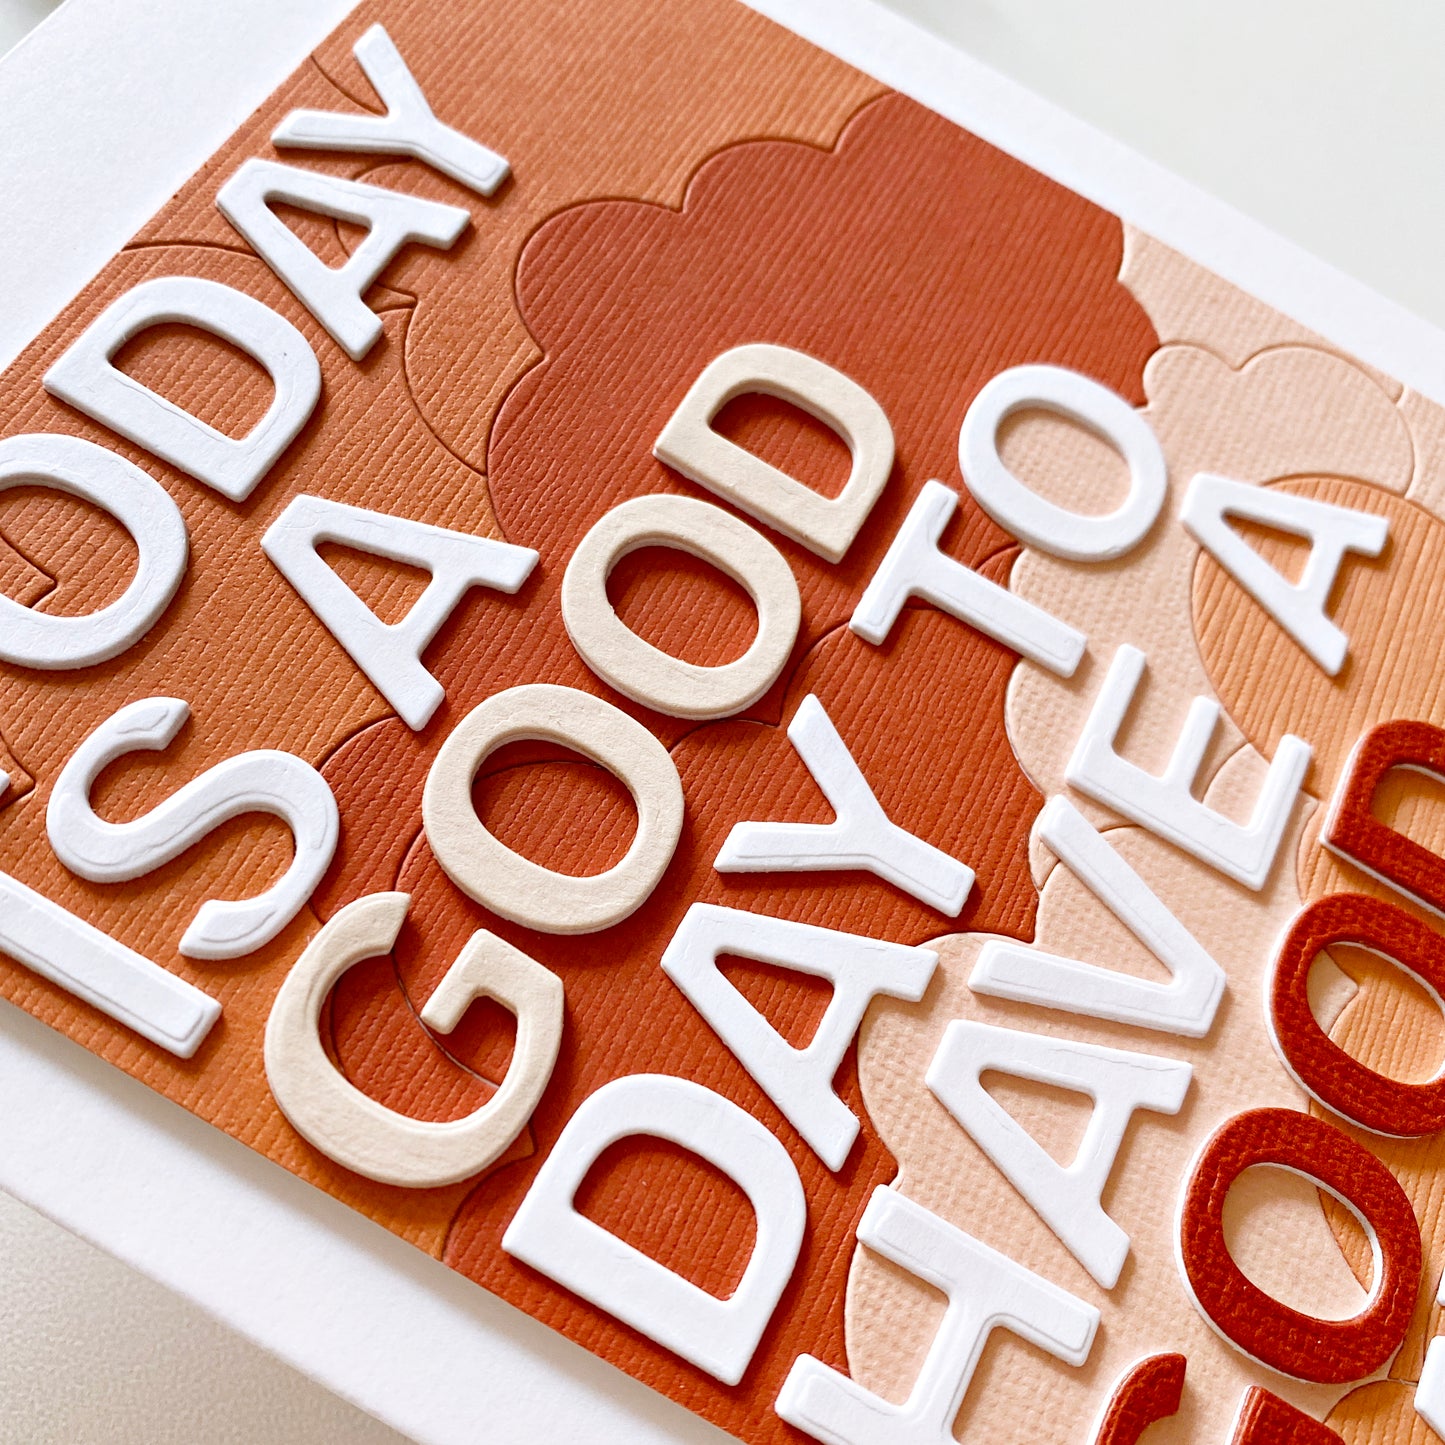 Today is a Good Day Die by Paige Taylor Evans